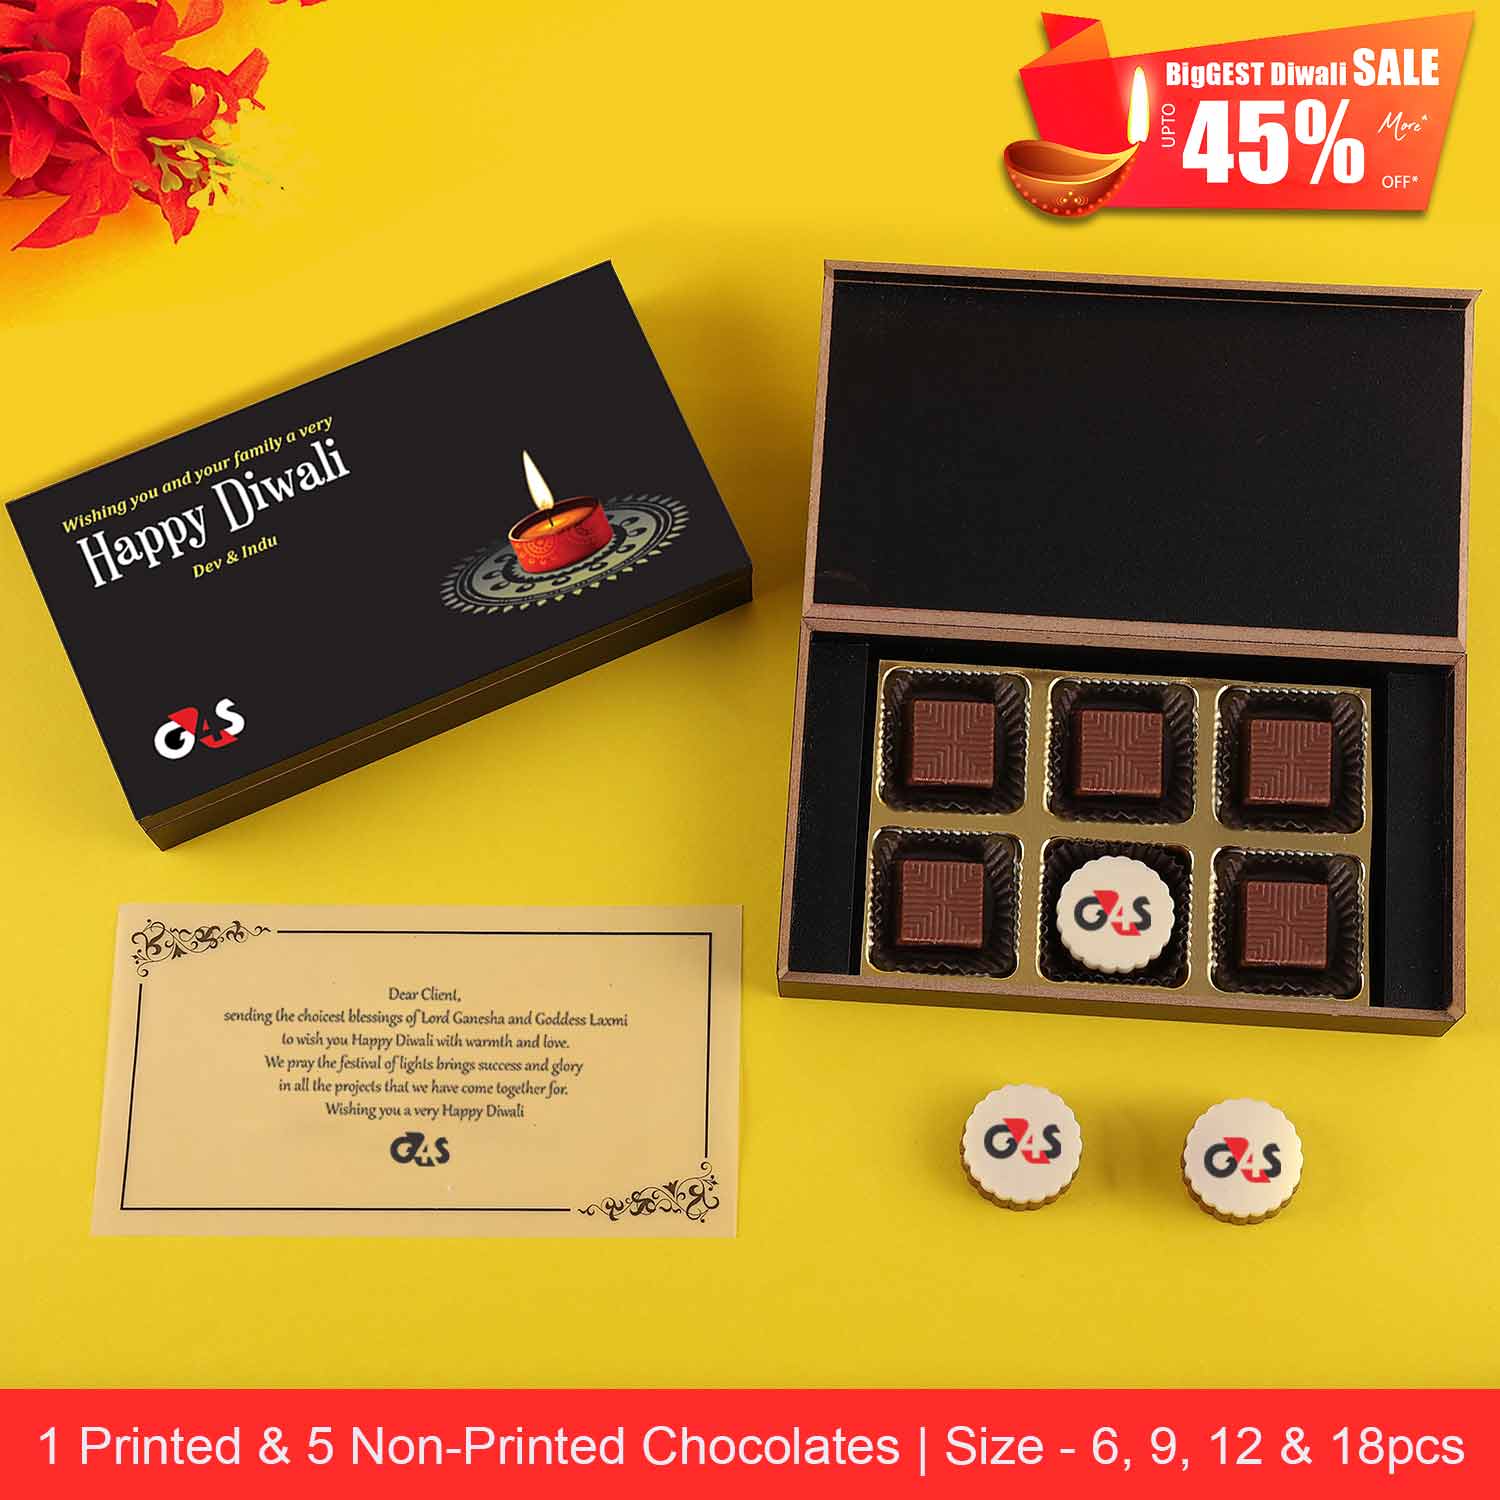 corporate gift boxes for employees,chocolate corporate gifts india,corporate gift boxes india,diwali sweets corporate